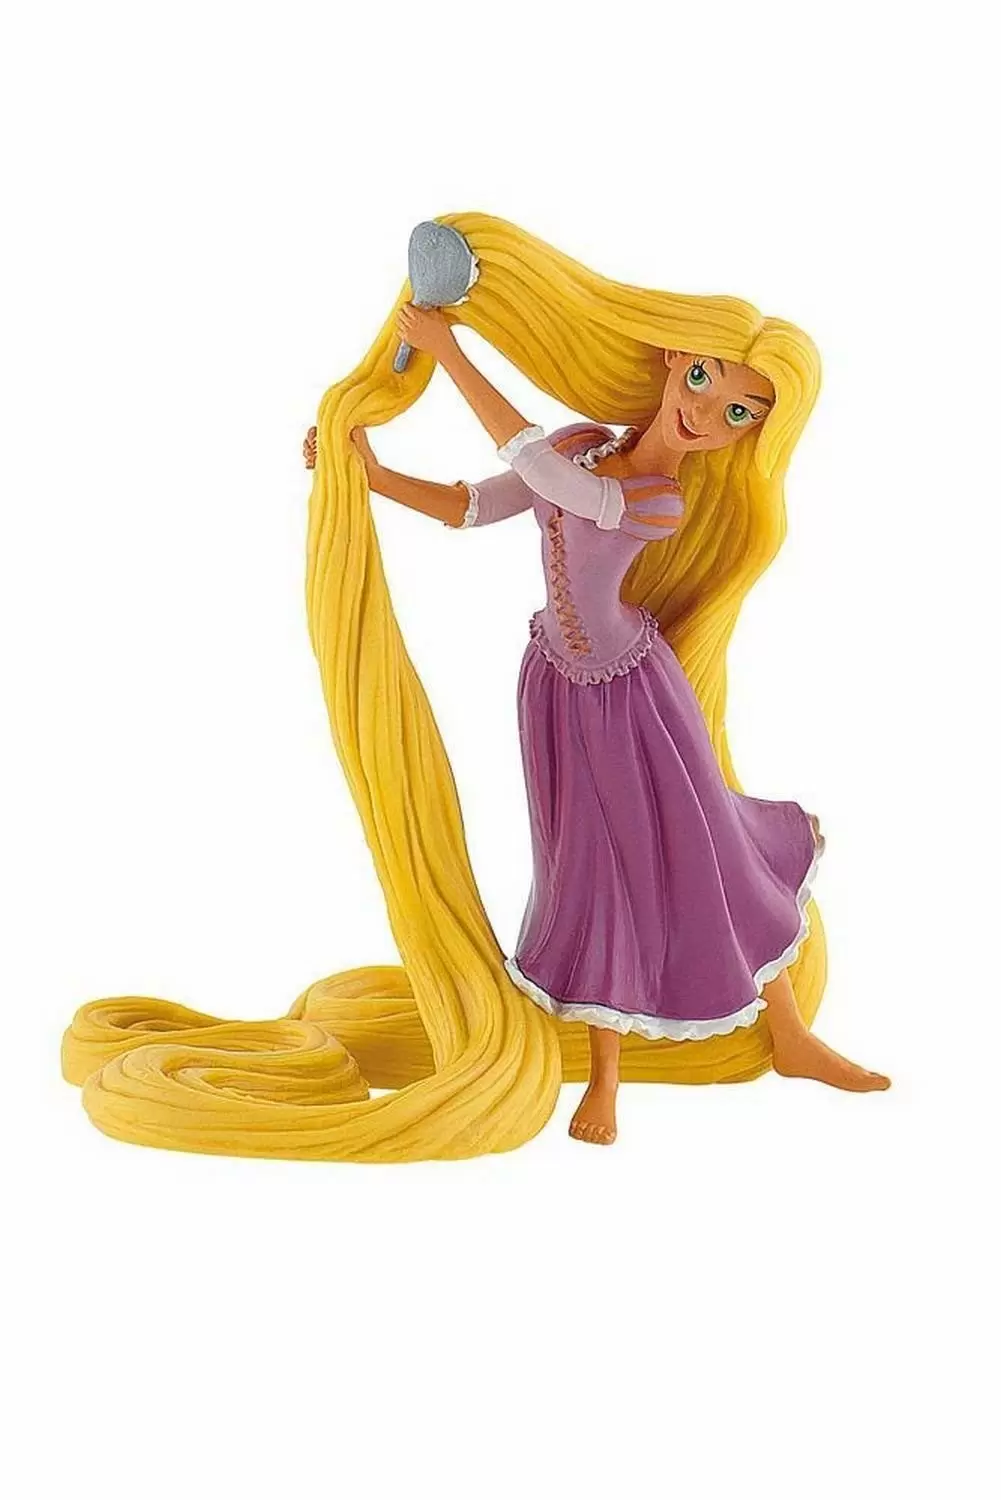 Bullyland - Rapunzel with comb